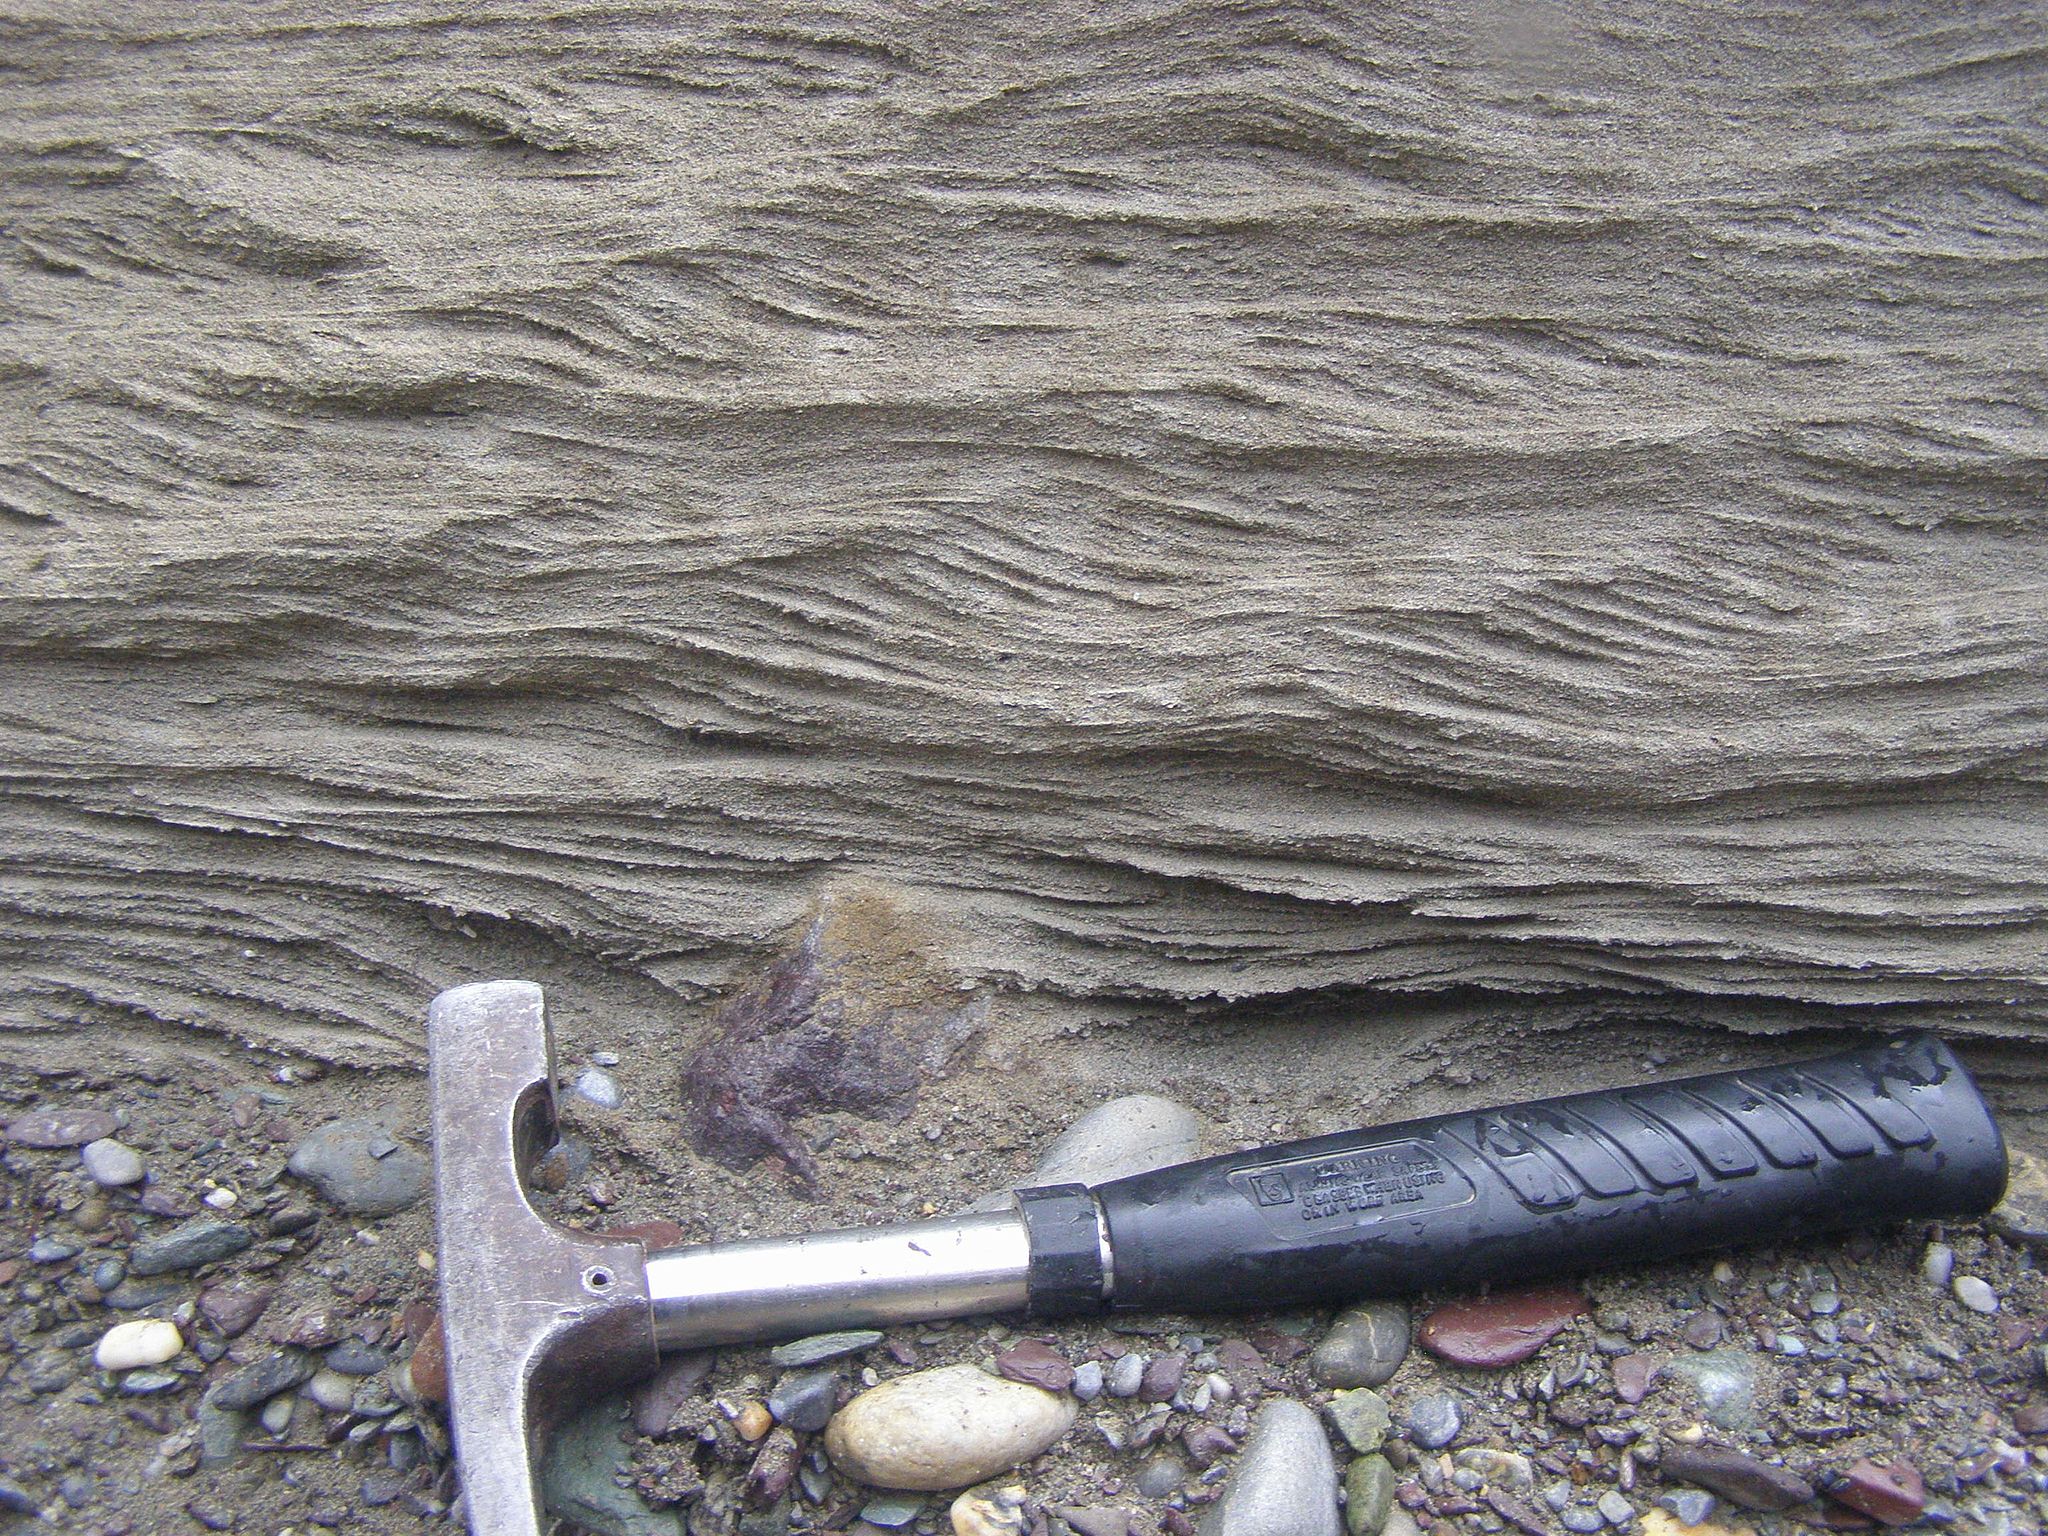 Cross sectional view of rock containing a series of elongated ridges and troughs that appear to be ascending or climbing toward the upper right; a rock hammer rests at the base of the outcrop for scale.